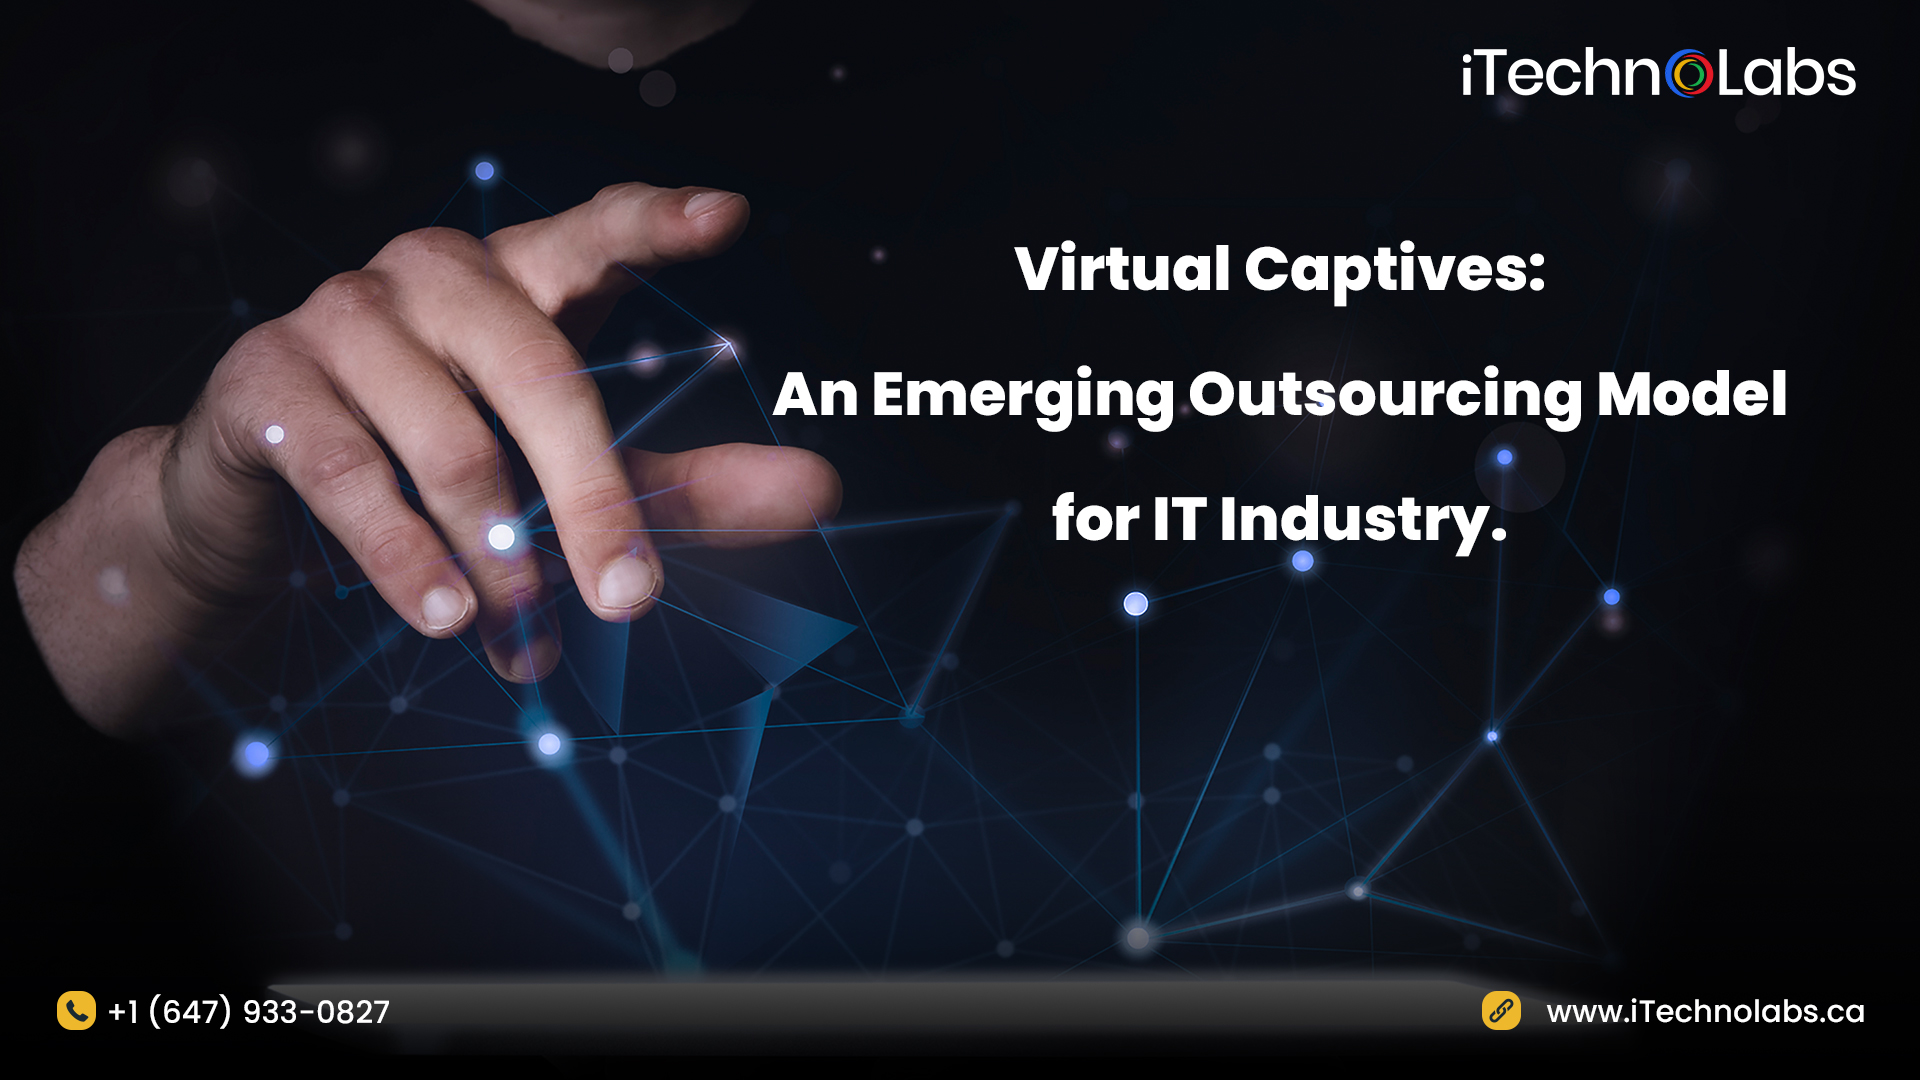 virtual captives-an emerging outsourcing model for it industry itechnolabs